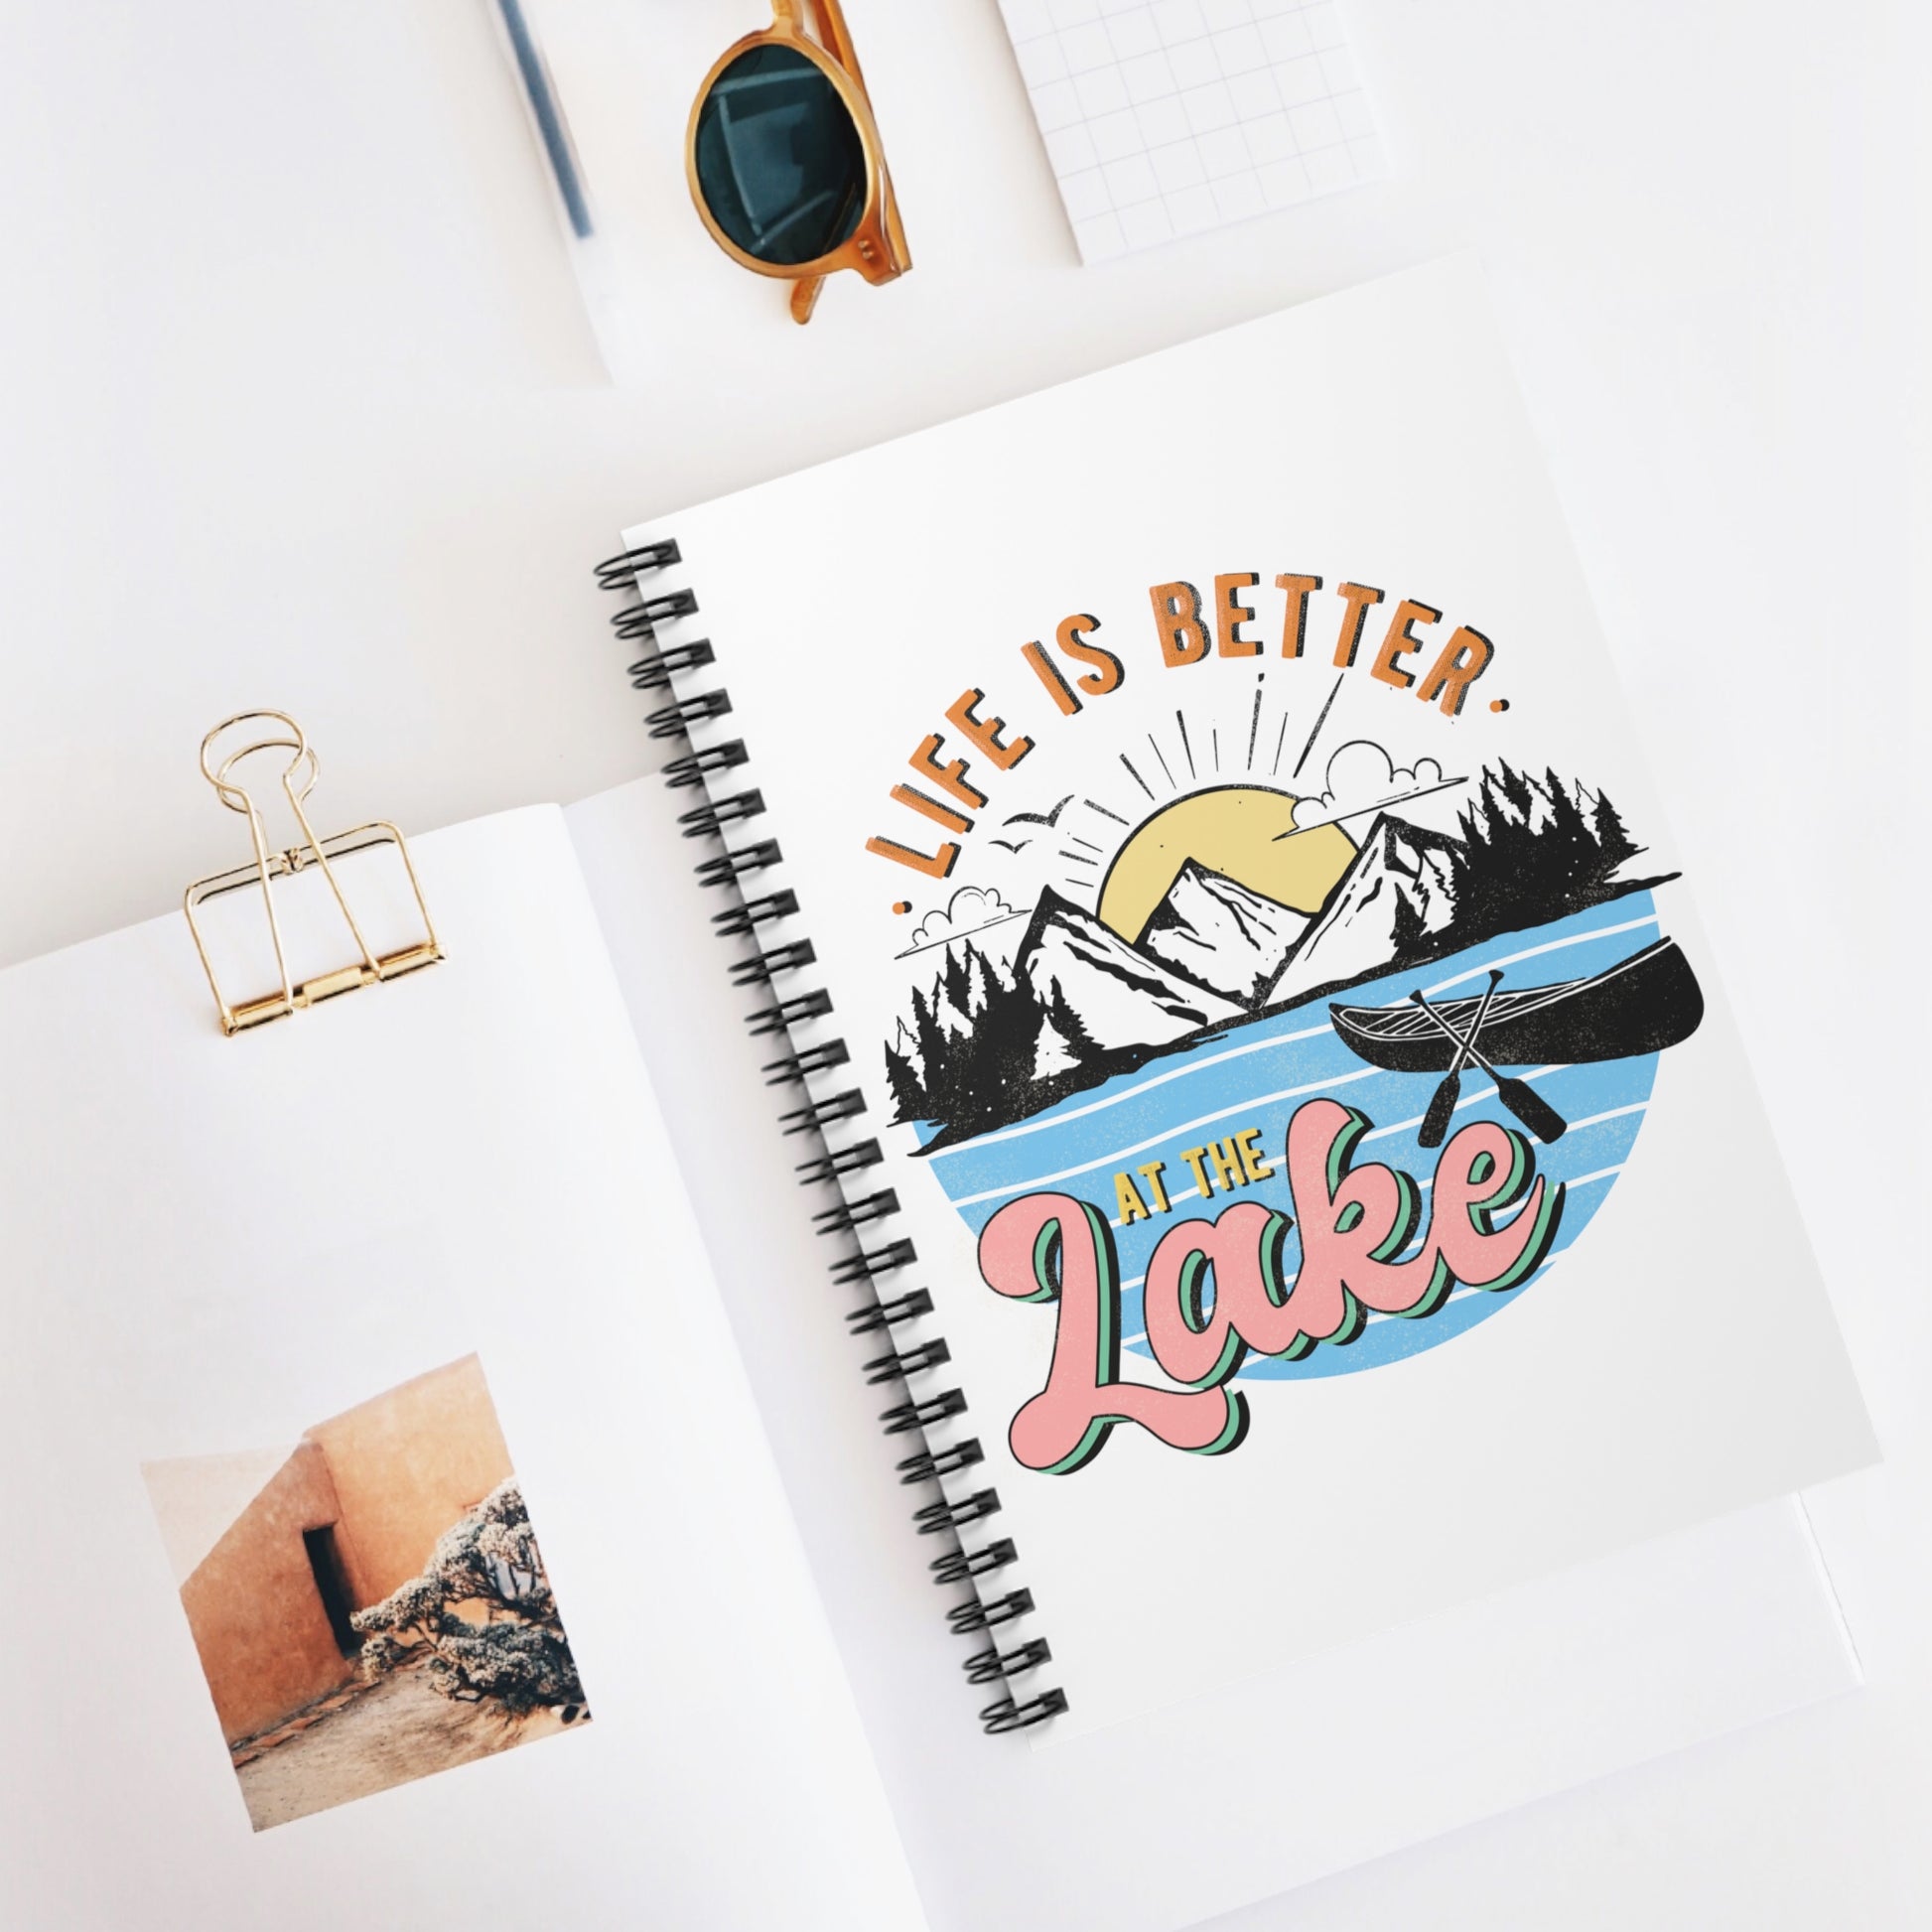 Life is Better: Spiral Notebook - Log Books - Journals - Diaries - and More Custom Printed by TheGlassyLass